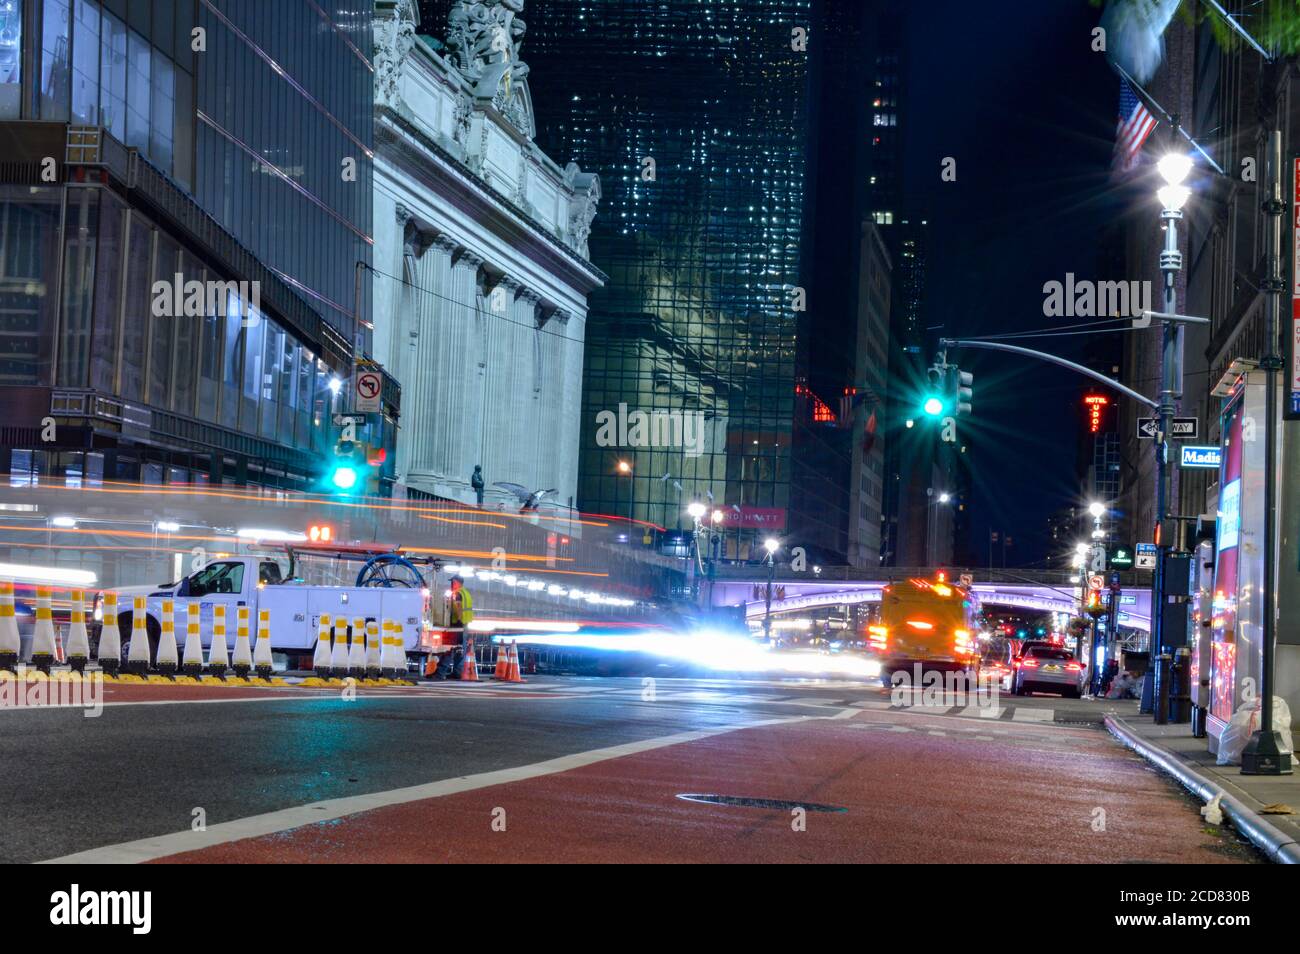 The Grand Central in New York City was lit up purple in honor of the suffrage centennial on Women’s Equality Day (August 26, 2020). Stock Photo